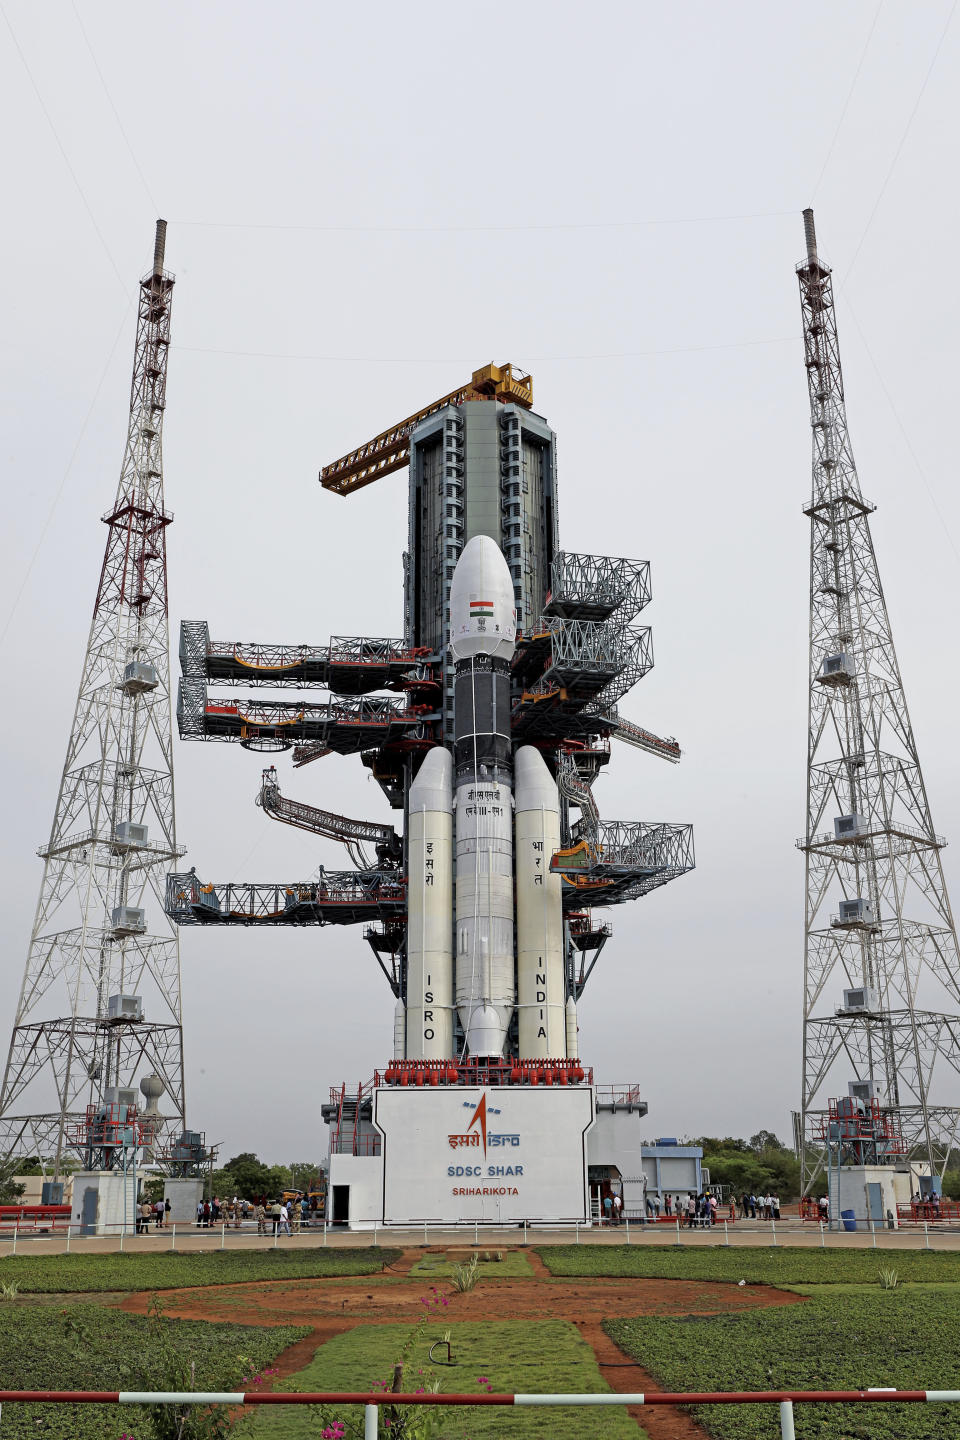 This July 2019, photo released by the Indian Space Research Organization (ISRO) shows its Geosynchronous Satellite Launch Vehicle (GSLV) MkIII-M1 being prepared for its July 15 launch in Sriharikota, an island off India's south-eastern coast. India is looking to take a giant leap in its space program and solidify its place among the world’s spacefaring nations with its second unmanned mission to the moon, this one aimed at landing a rover near the unexplored south pole. (Indian Space Research Organization via AP)